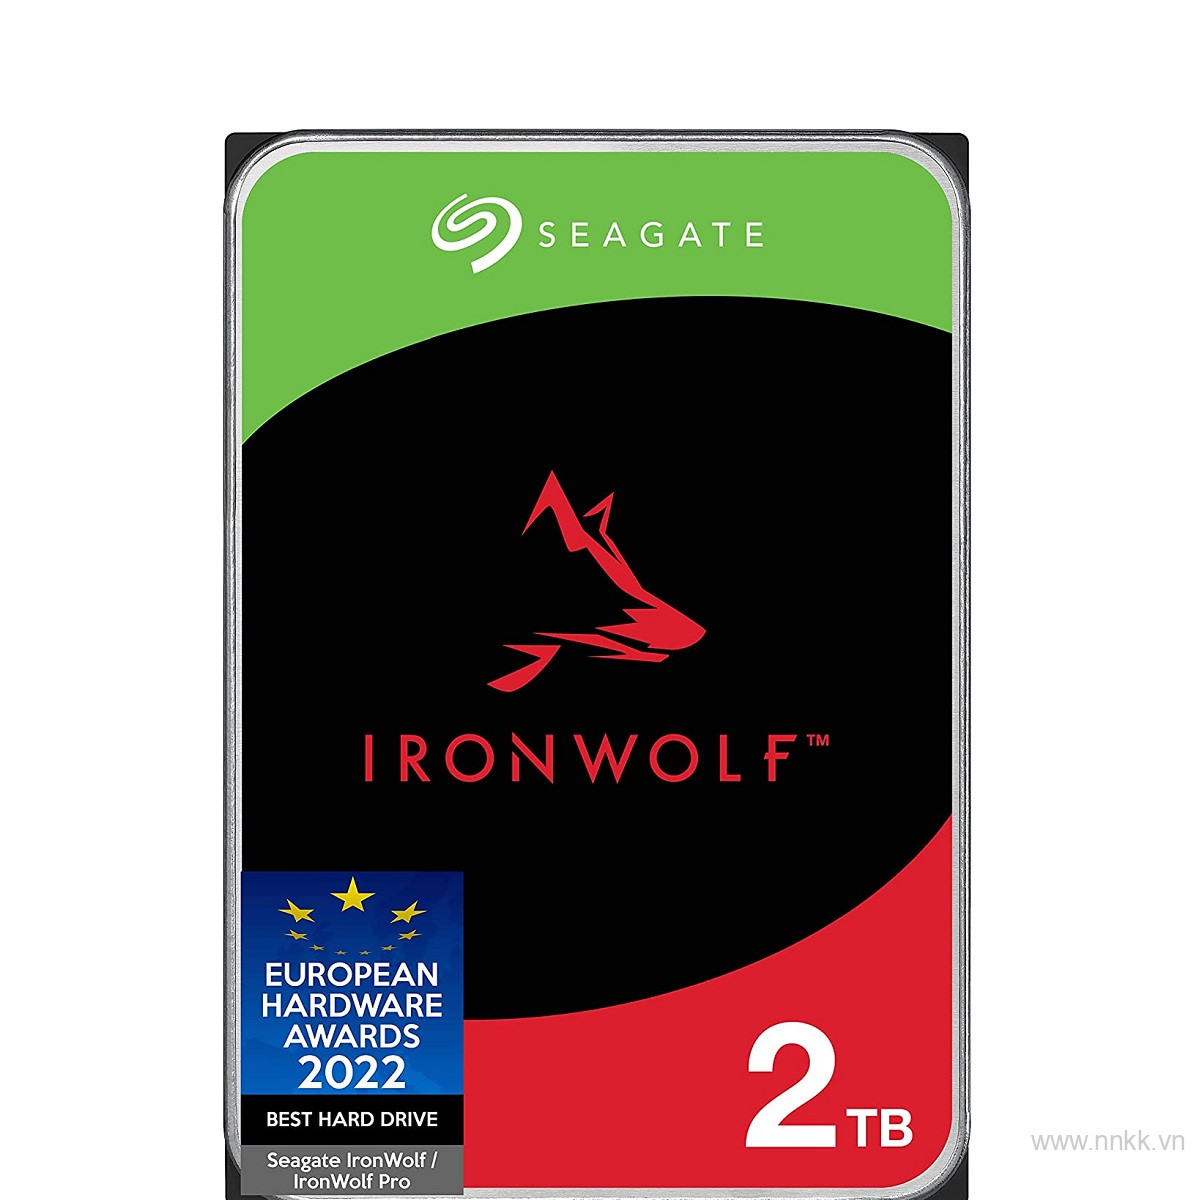 Ổ cứng 3.5 inch HDD 2TB SEAGATE IronWolf ST2000VN004